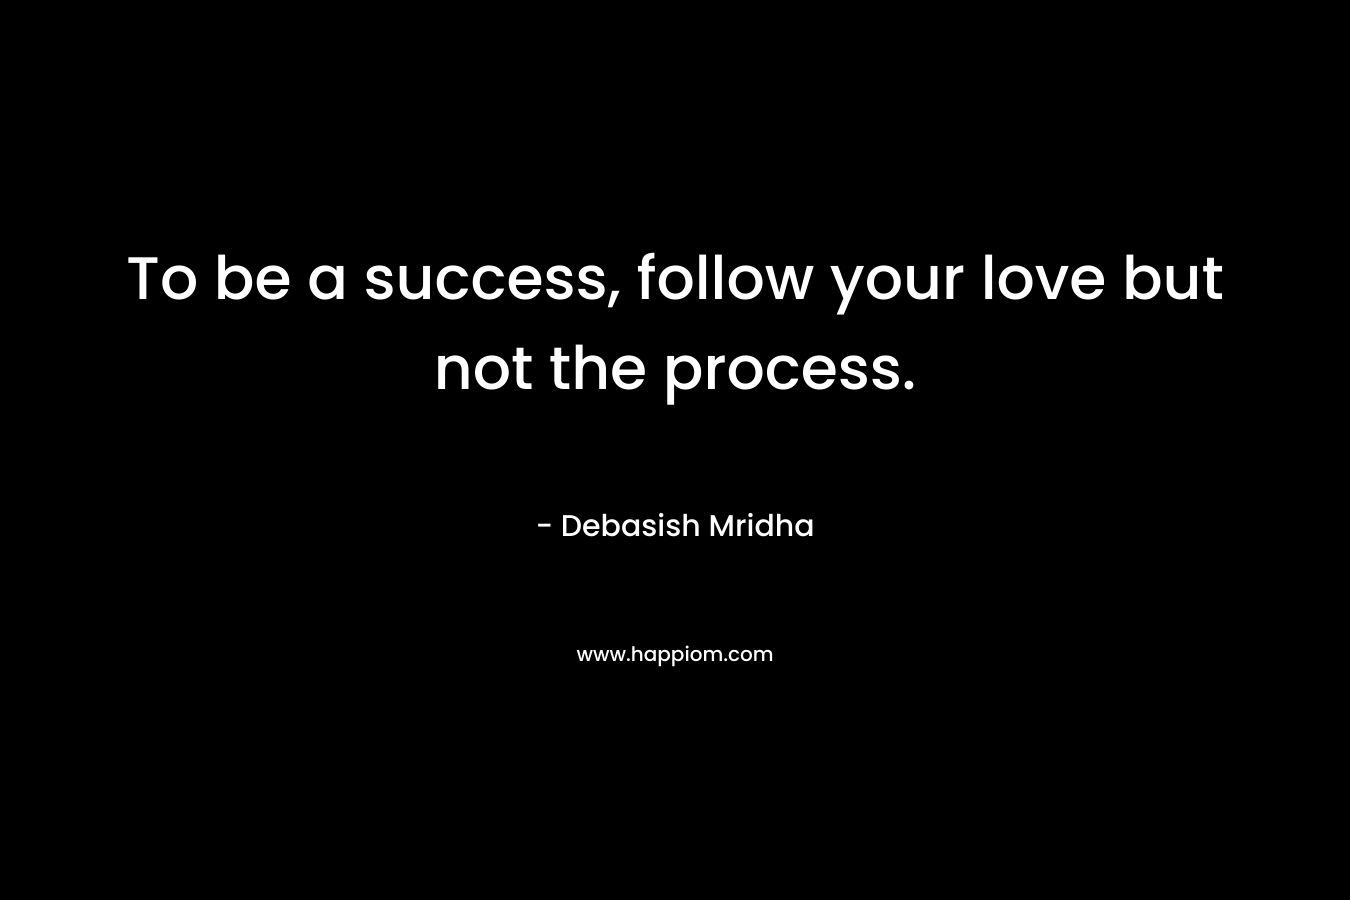 To be a success, follow your love but not the process.